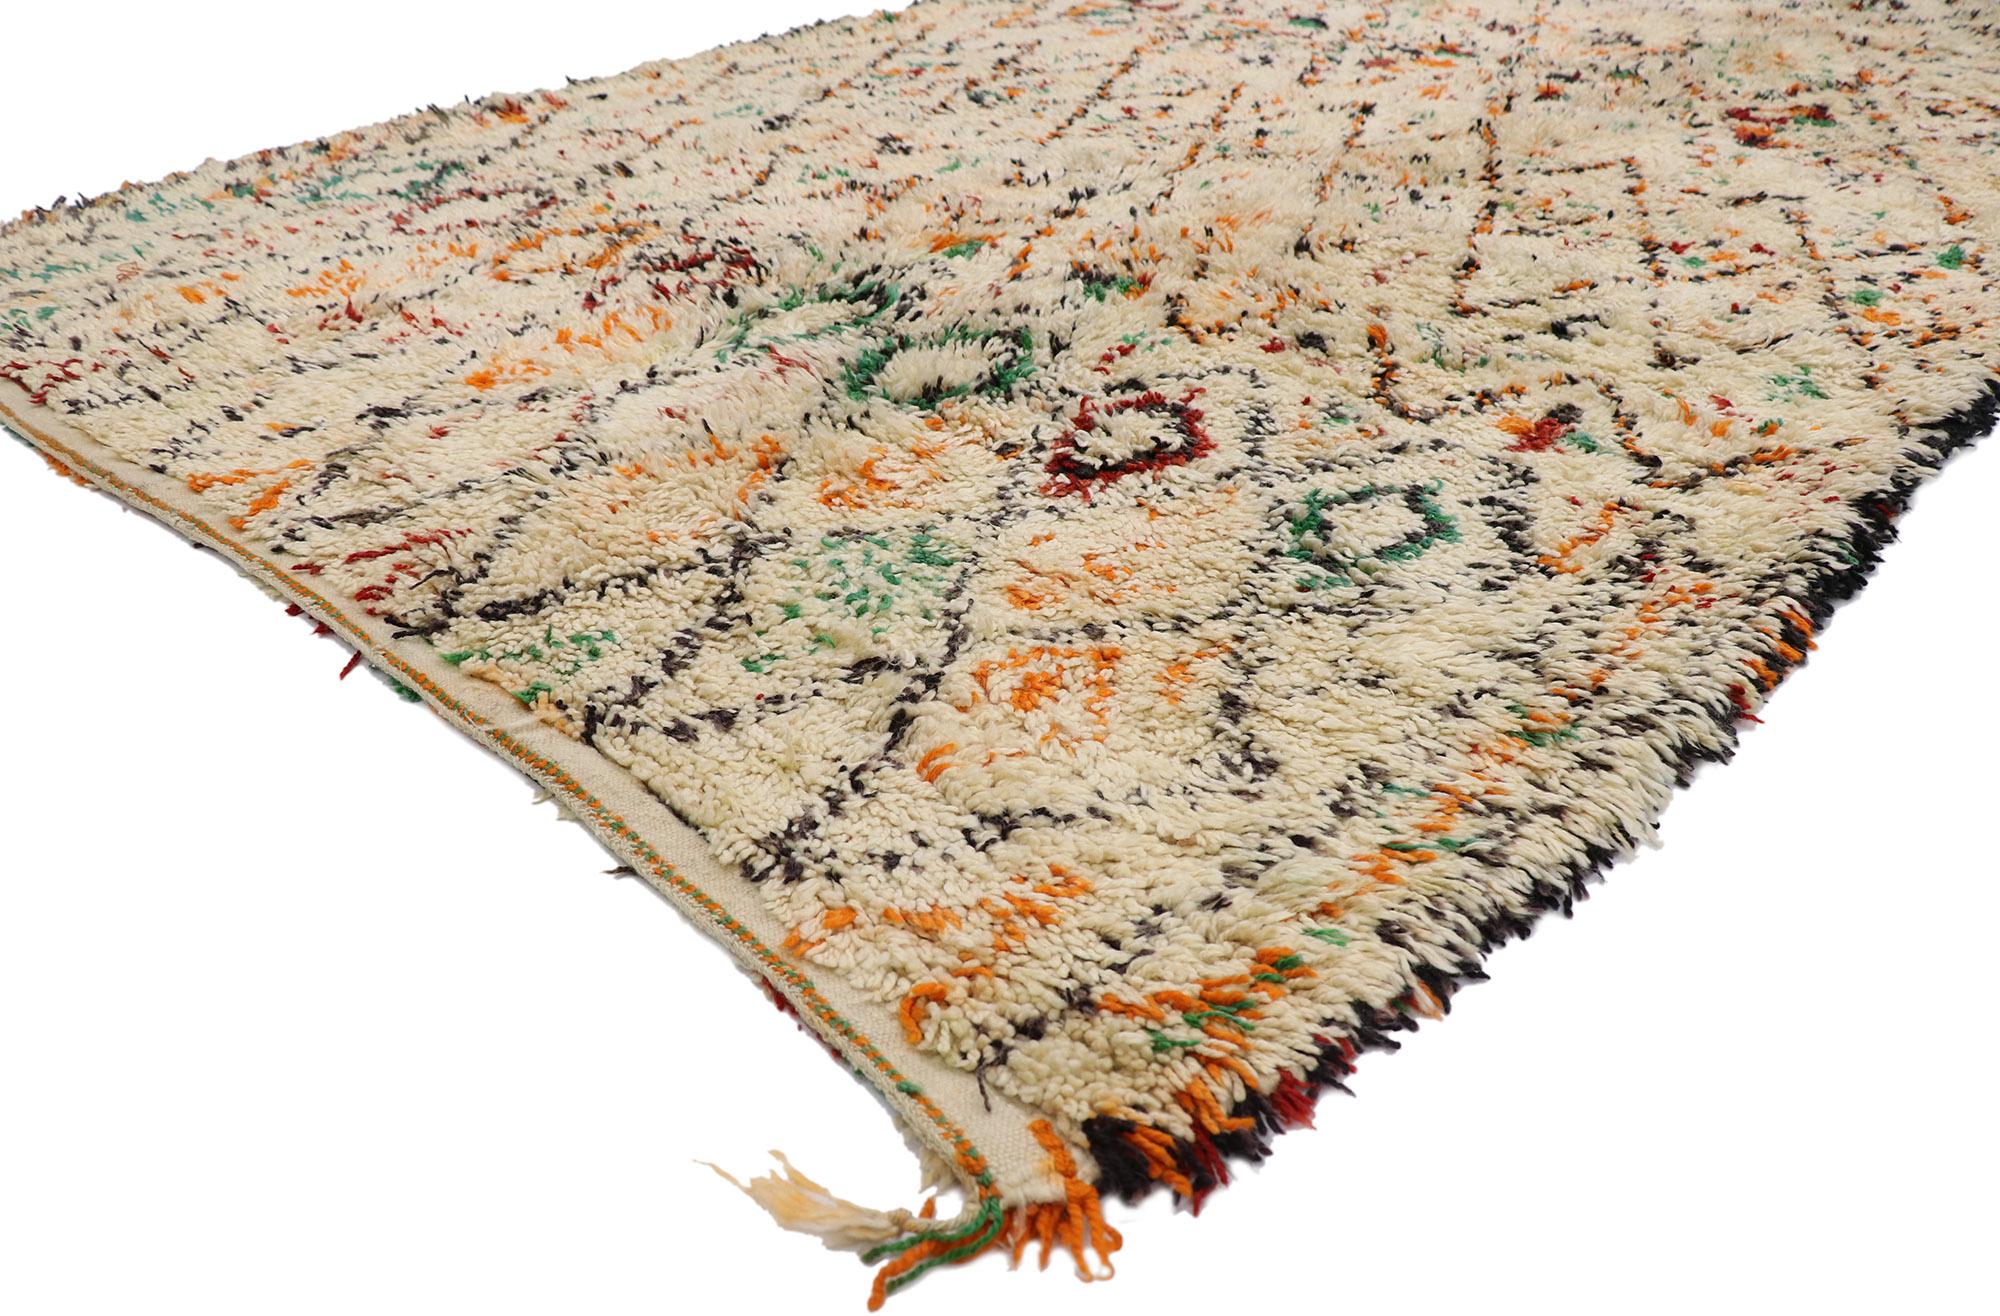 21386 Vintage Berber Beni Ourain Moroccan rug with Tribal Style 06'00 x 10'10. With its simplicity, plush pile and tribal style, this hand knotted wool vintage Berber Beni Ourain Moroccan rug is a captivating vision of woven beauty. It features a